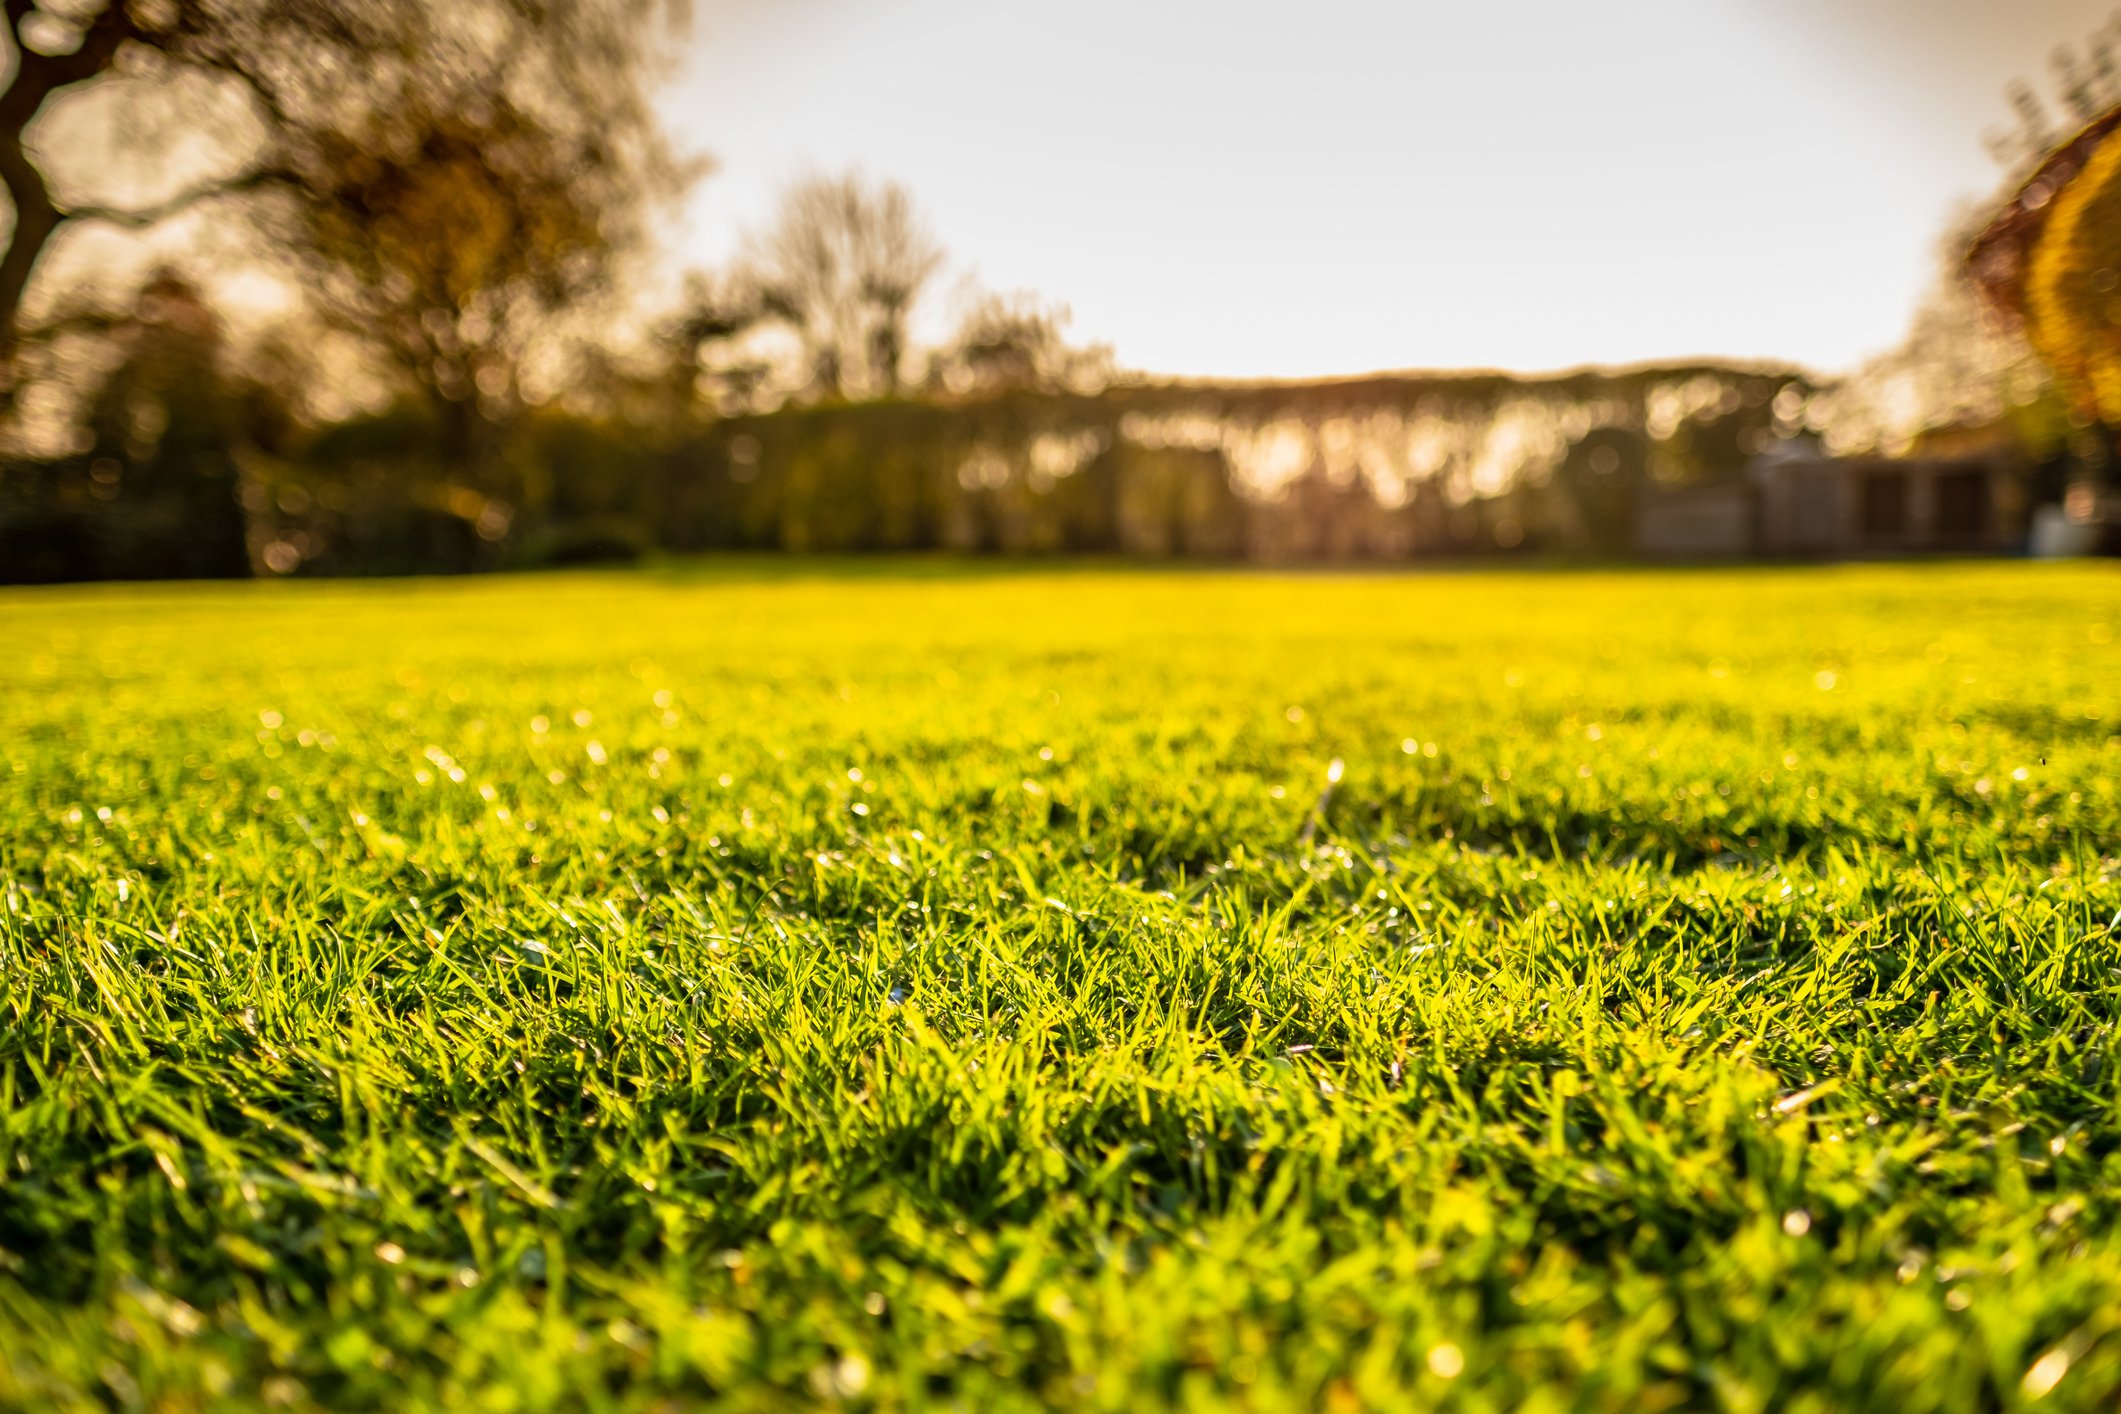 A green, healthy lawn is important.